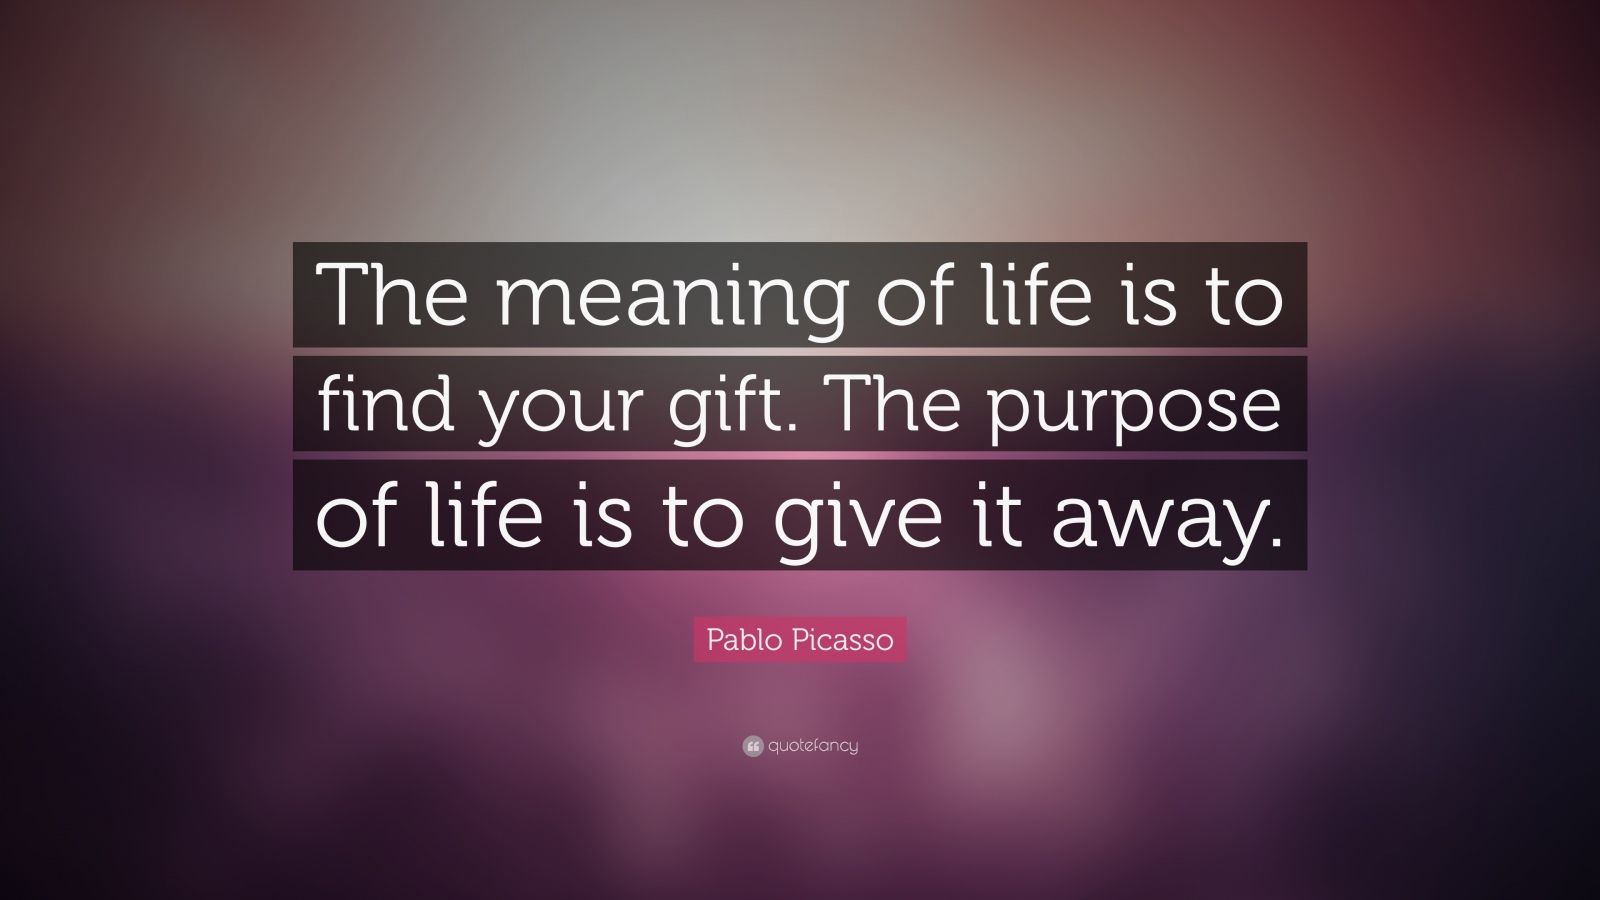 Pablo Picasso Quote “The meaning of life is to find your